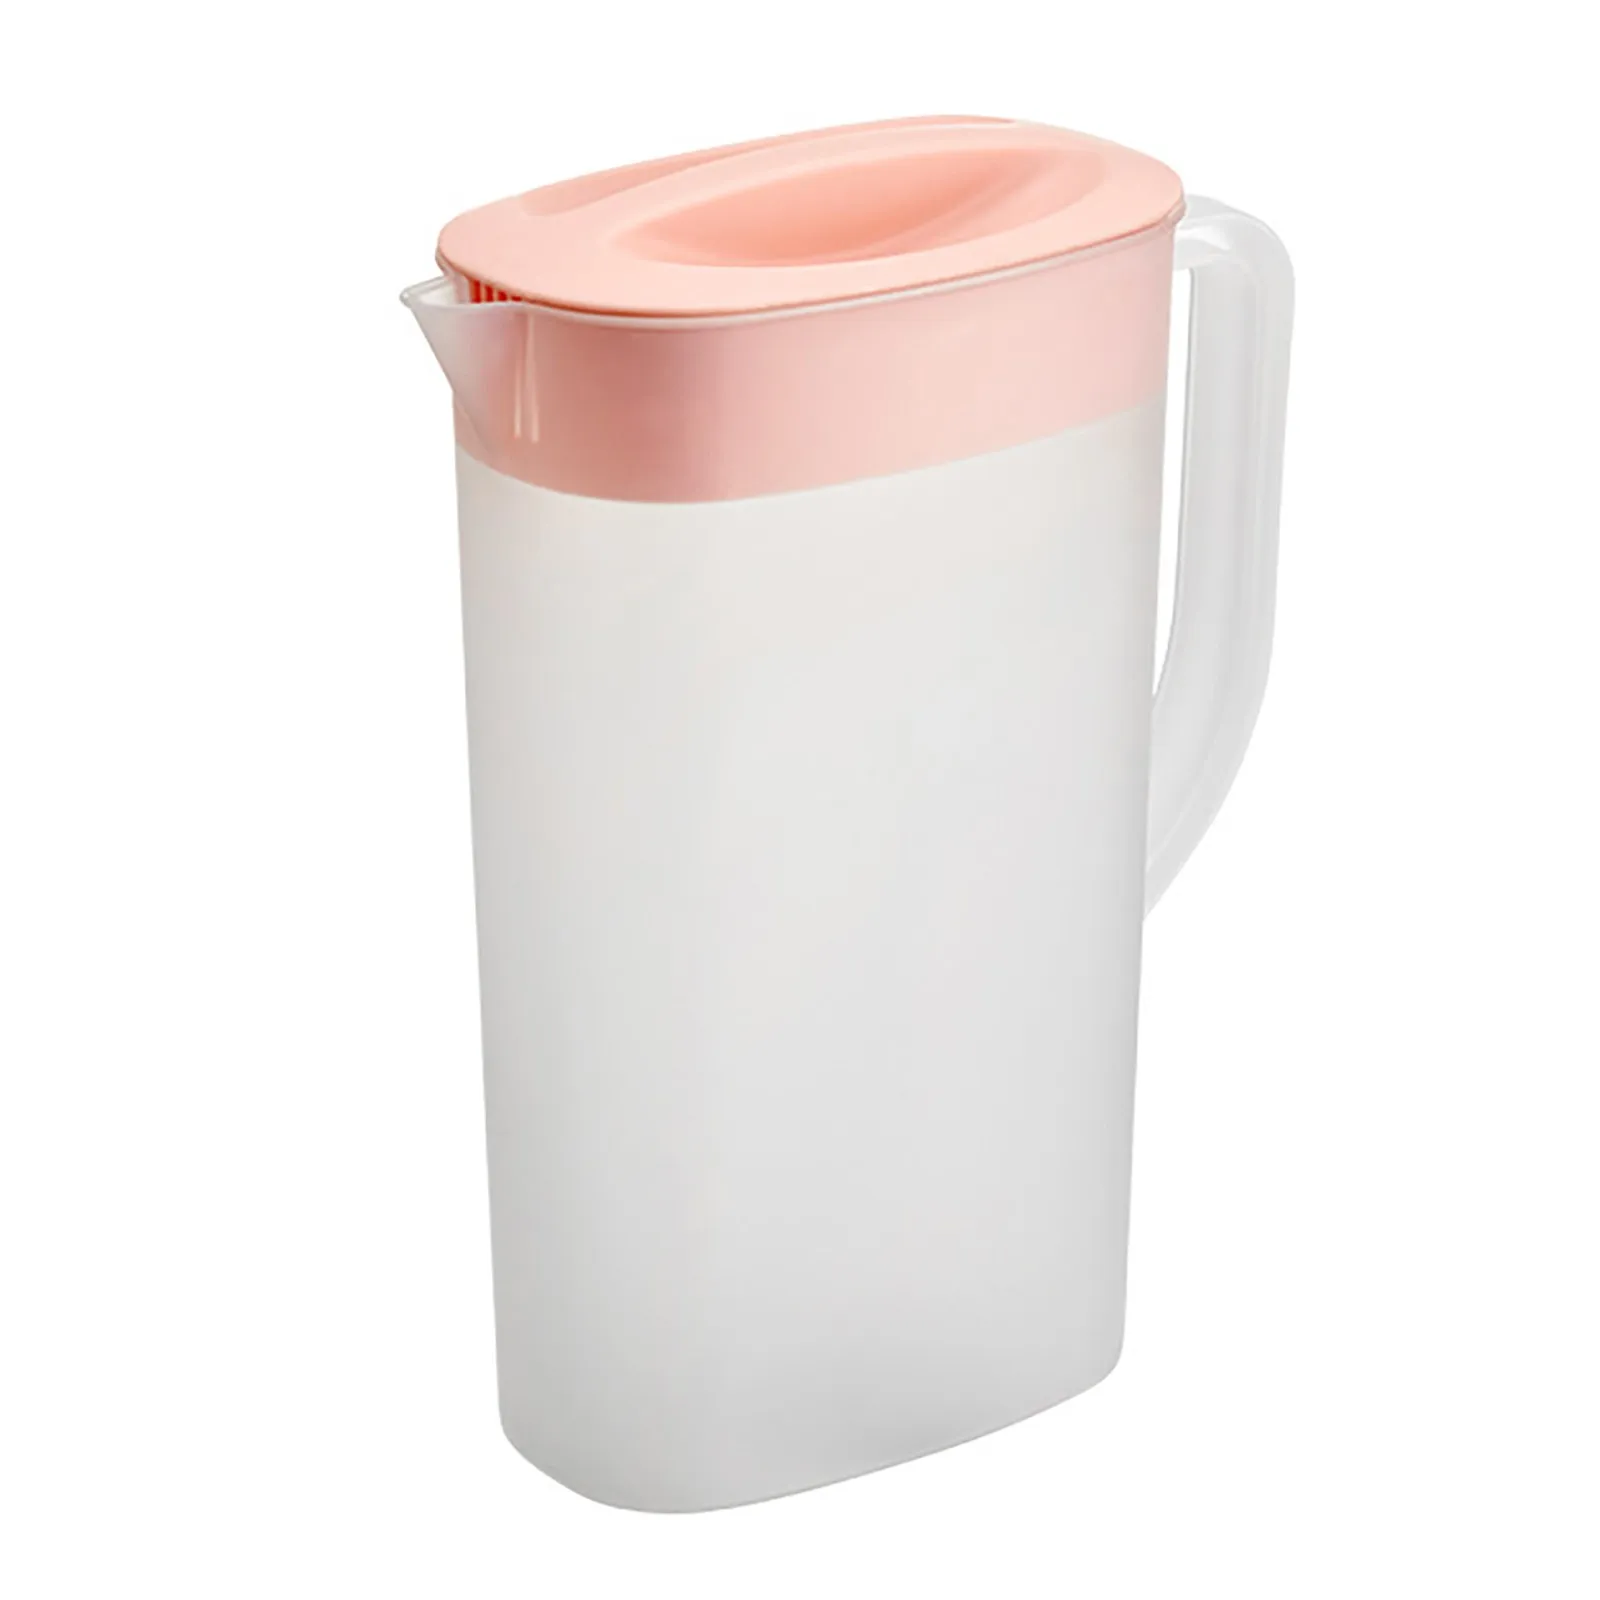 https://ae01.alicdn.com/kf/S2a739daa64da4b2b90d0ba9788ee1b287/Pitcher-With-Lid-Carafes-Mix-Drinks-Water-Jug-For-Hot-Cold-Lemonade-Juice-Ceramic-Coffee-Mugs.jpg